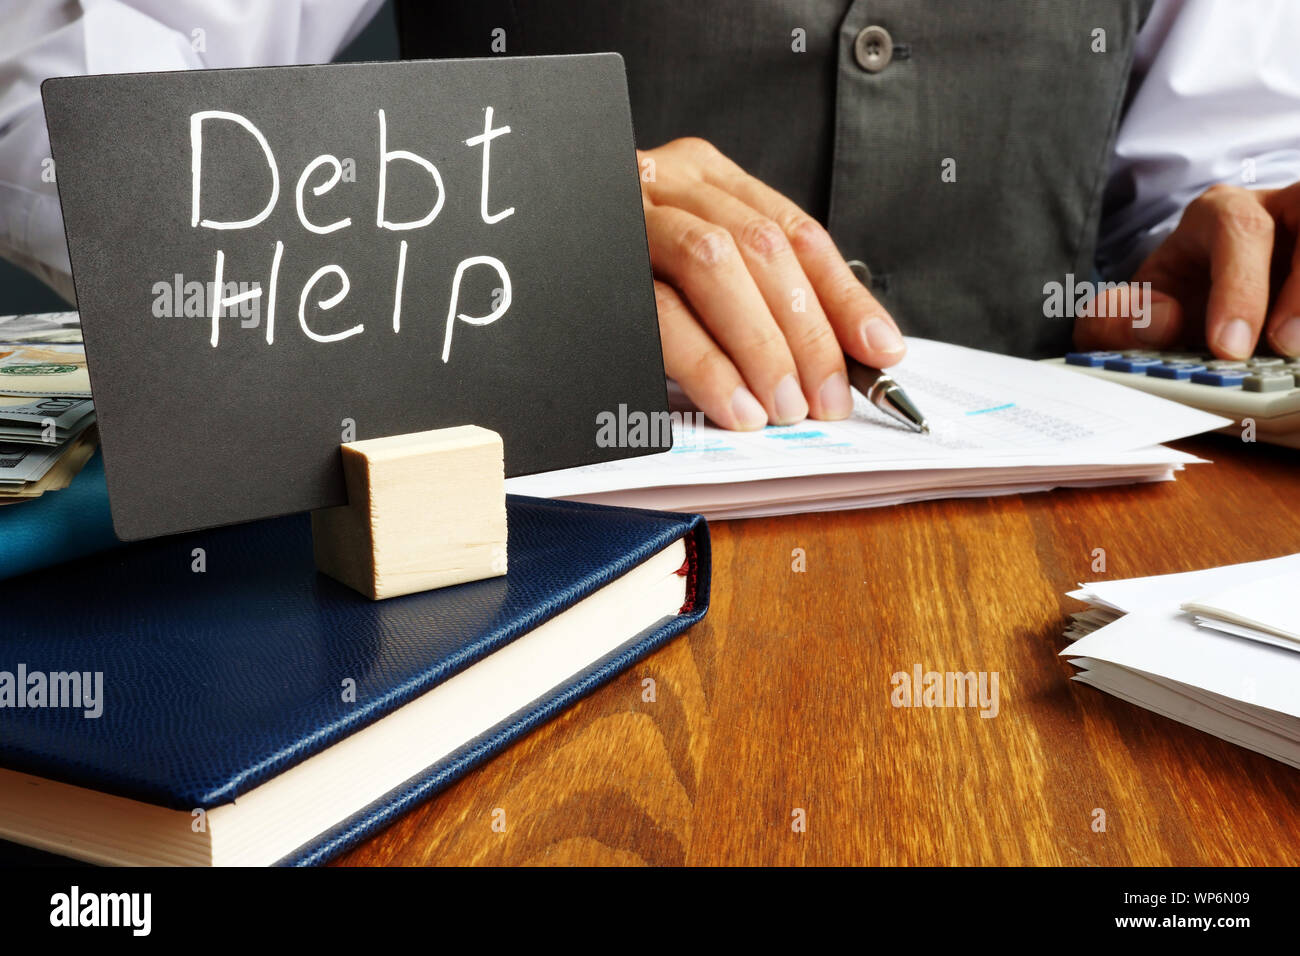 Debt help sign and working man in the office. Stock Photo